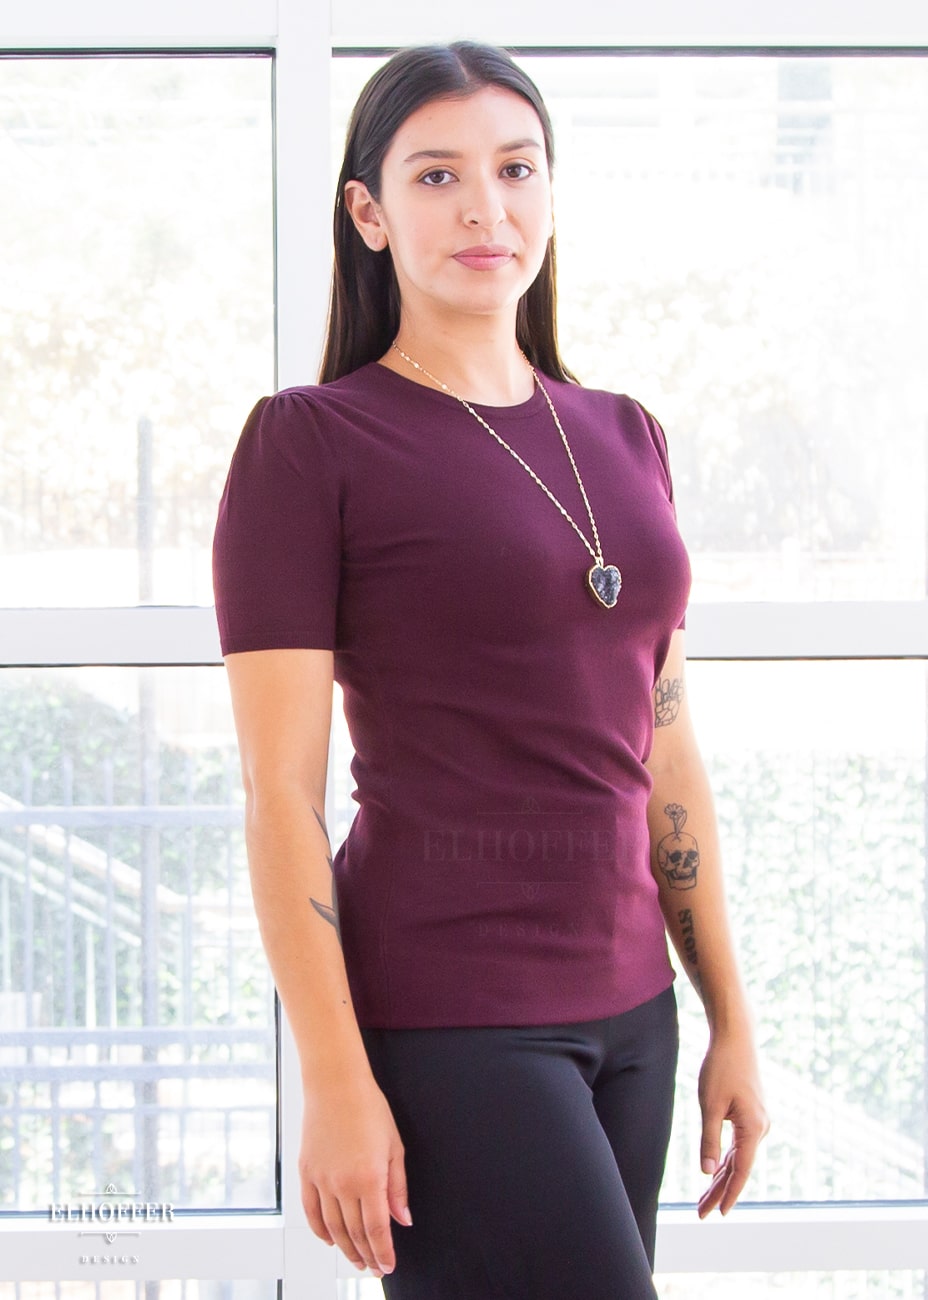 Alexandra, a light olive skinned S model with long dark brown hair, is wearing a short sleeve light weight dark reddish purple knit top. The top hits about mid hip in length and the sleeves have pleated gathering at the shoulders.